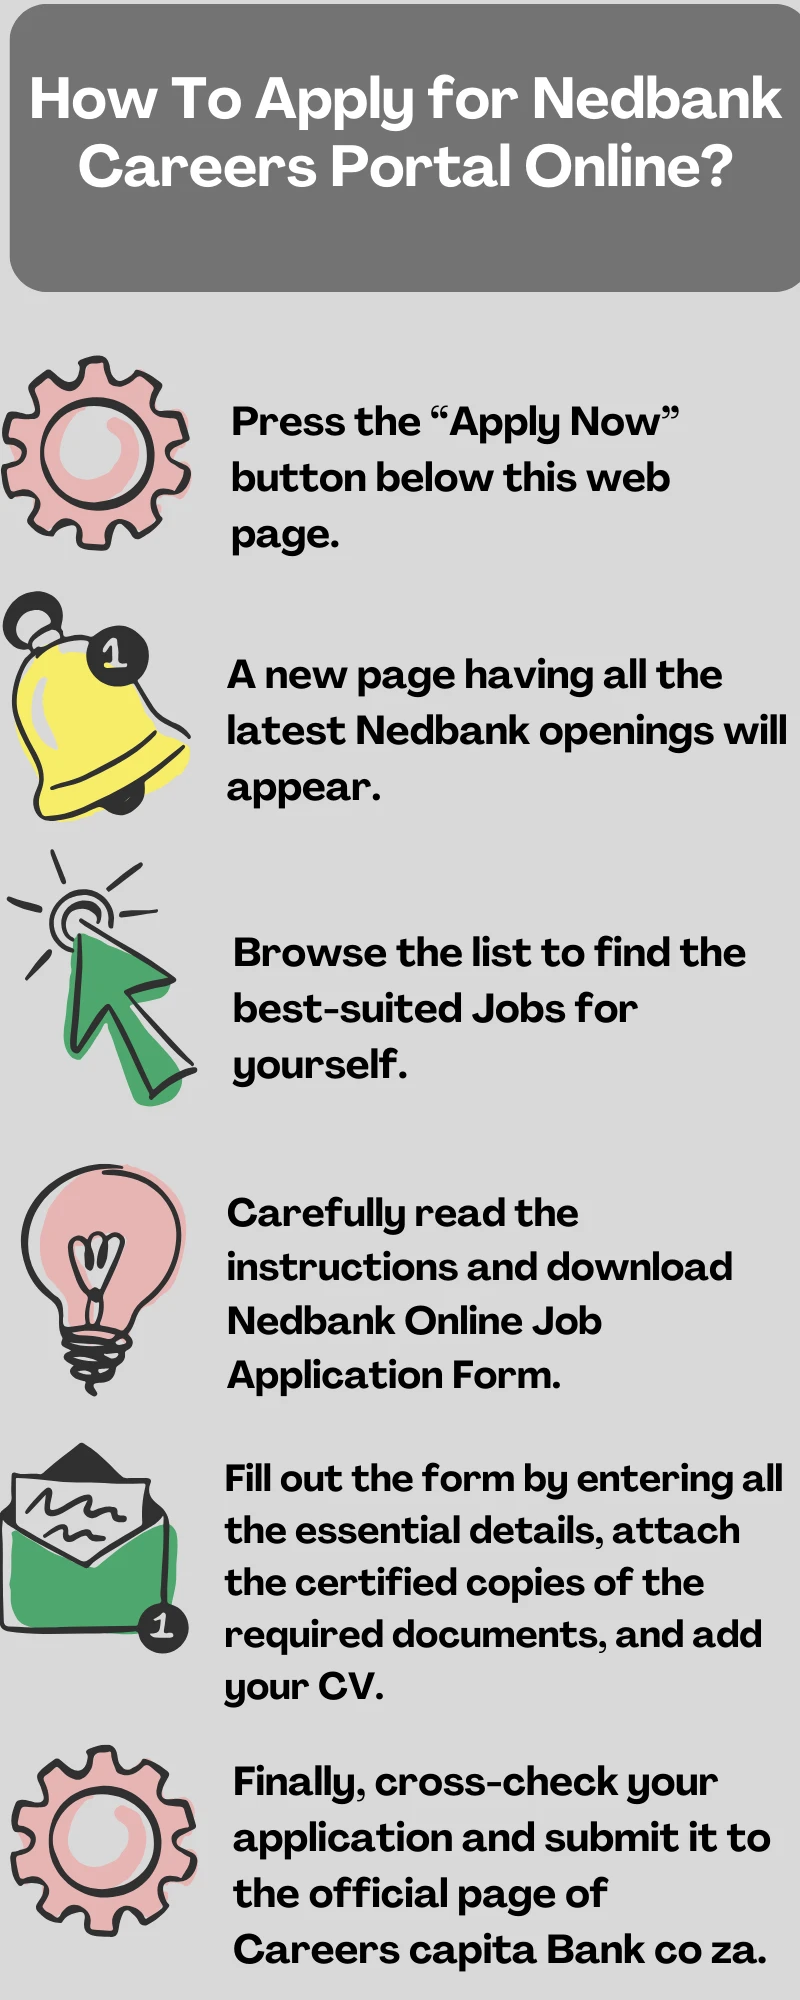 How To Apply for Nedbank Careers Portal Online?